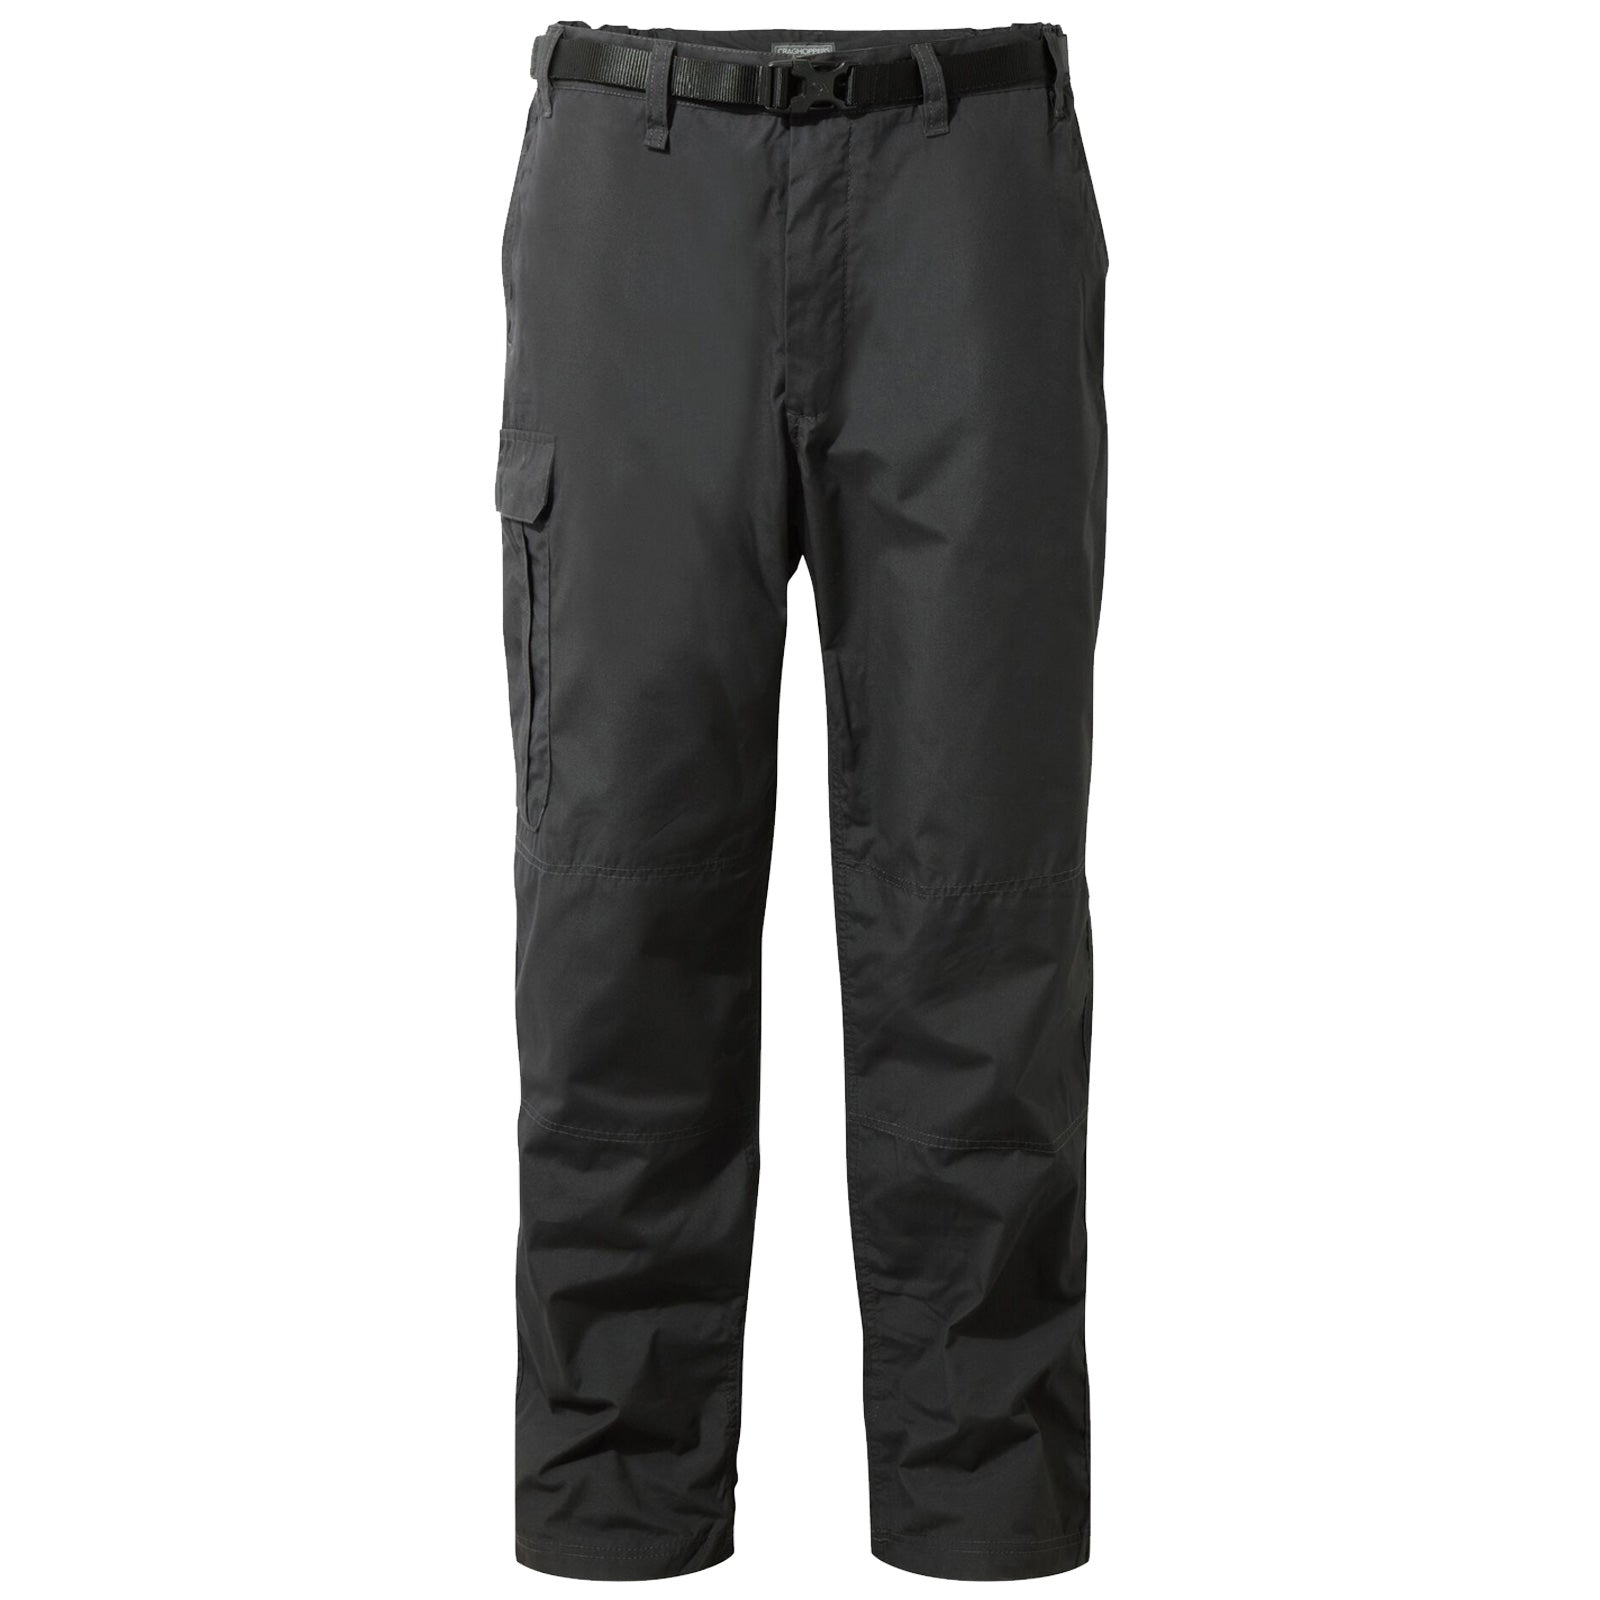 Craghoppers Mens Kiwi Winter Lined Trouser - Men's from Gaynor Sports UK